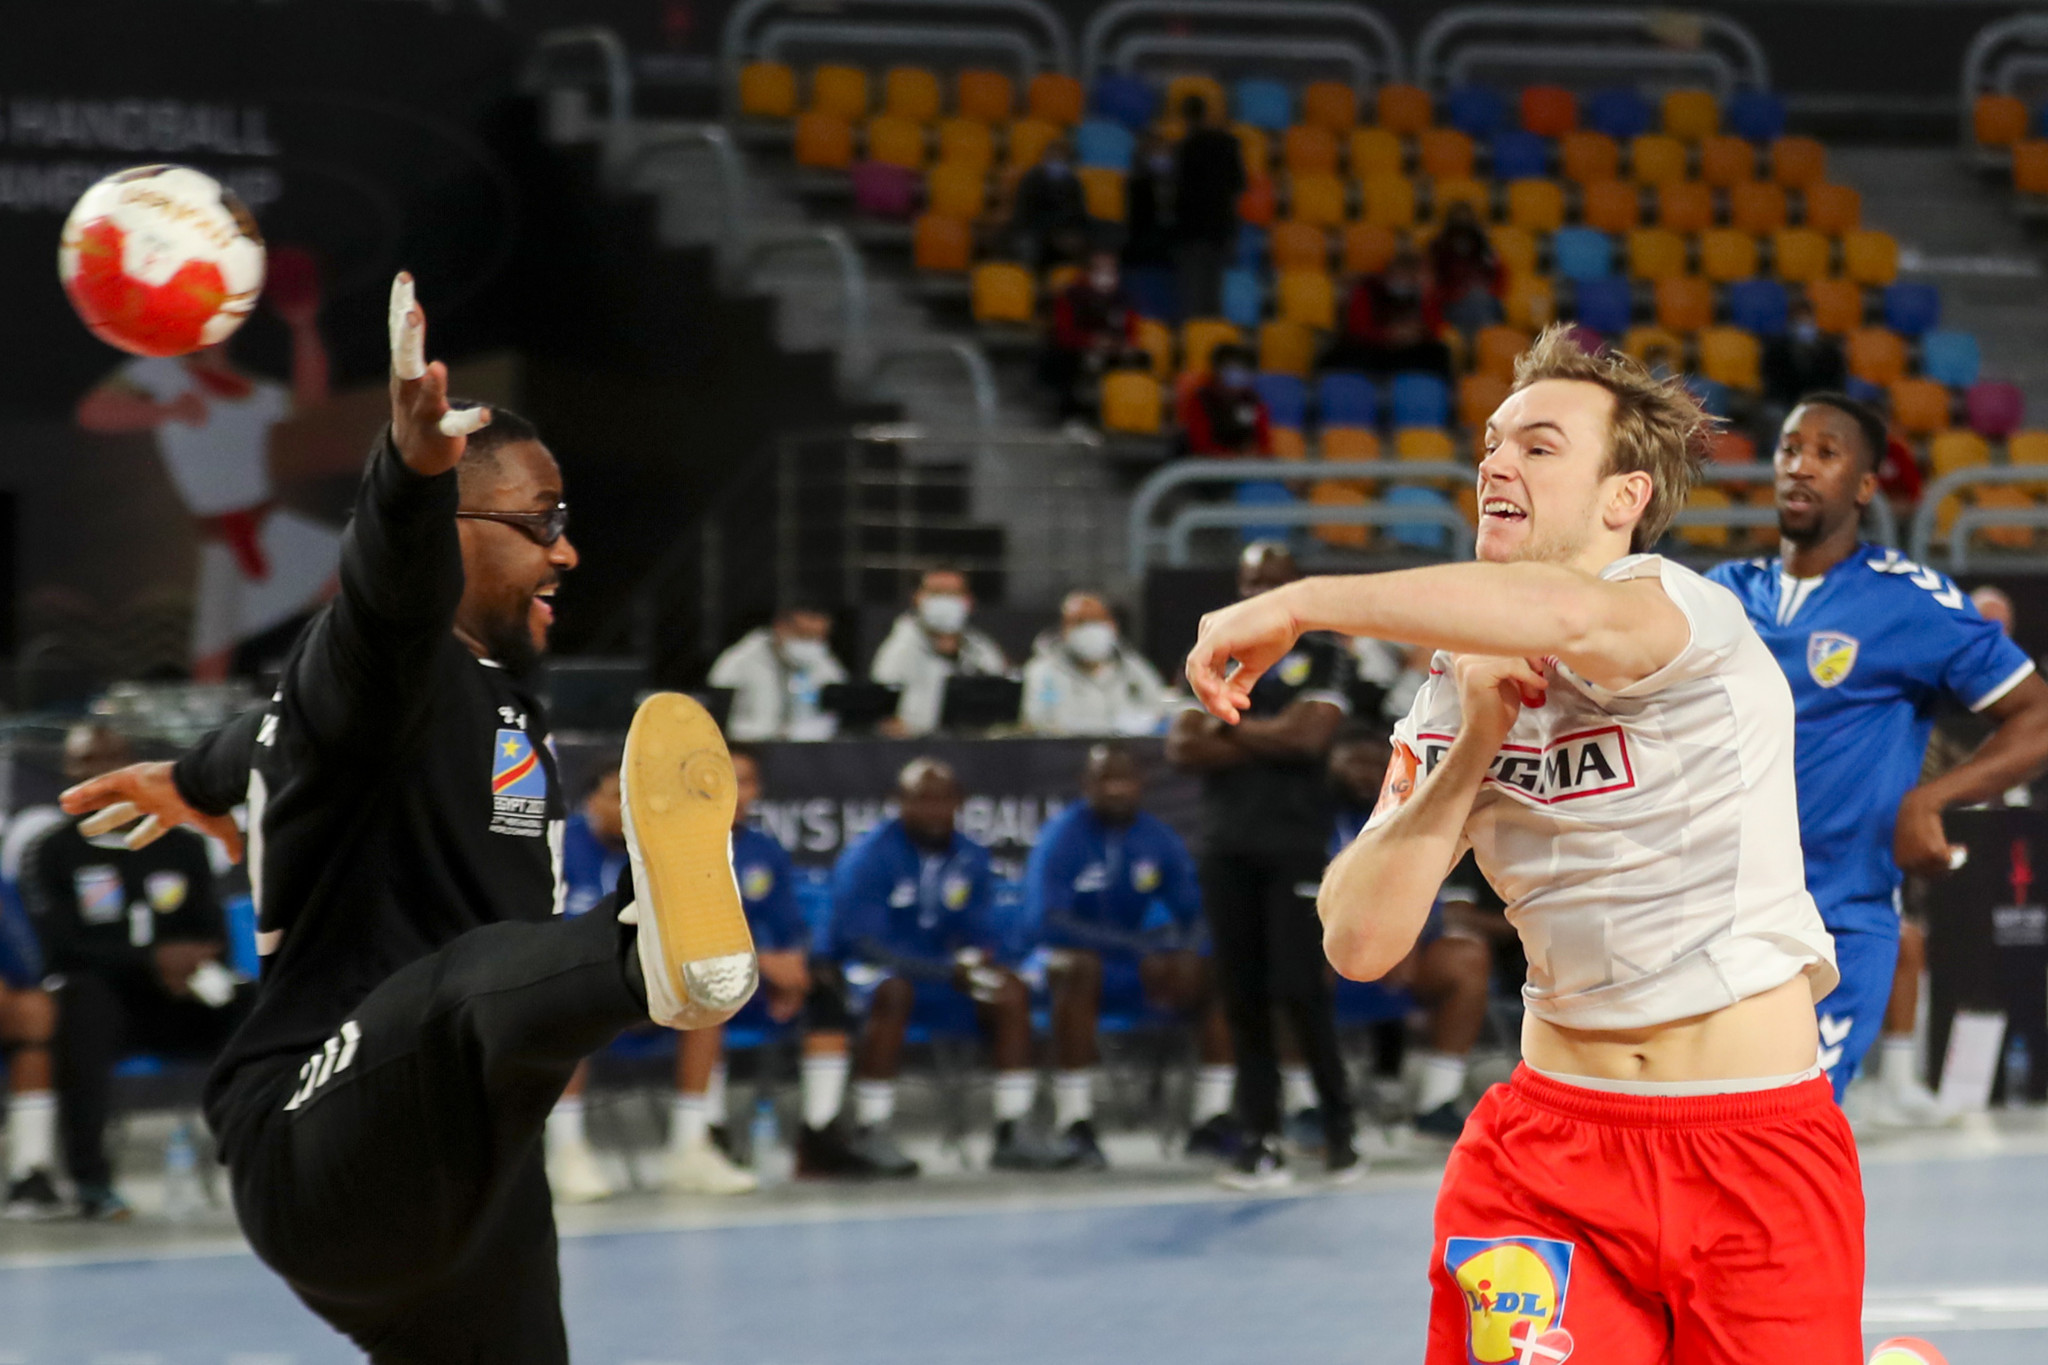 World champions Denmark comfortably beat DR Congo in Group D of the IHF Men's World Handball Championship in Egypt ©Getty Images